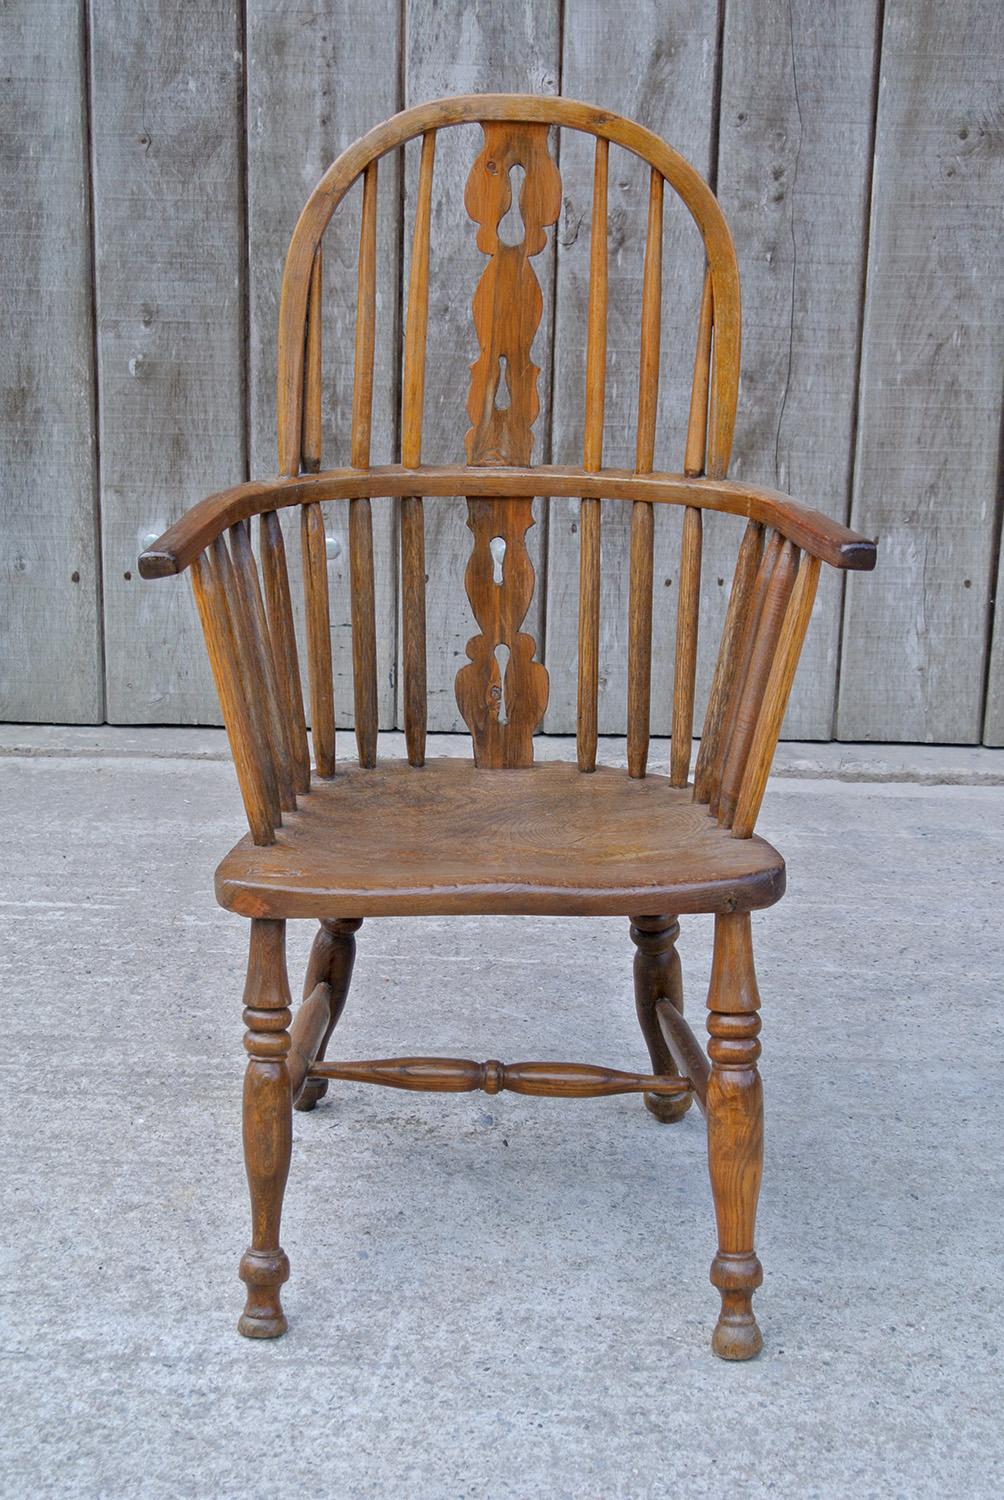 Primitive 19th Century Yew and Ash Windsor Chair In Good Condition For Sale In Heathfield, GB